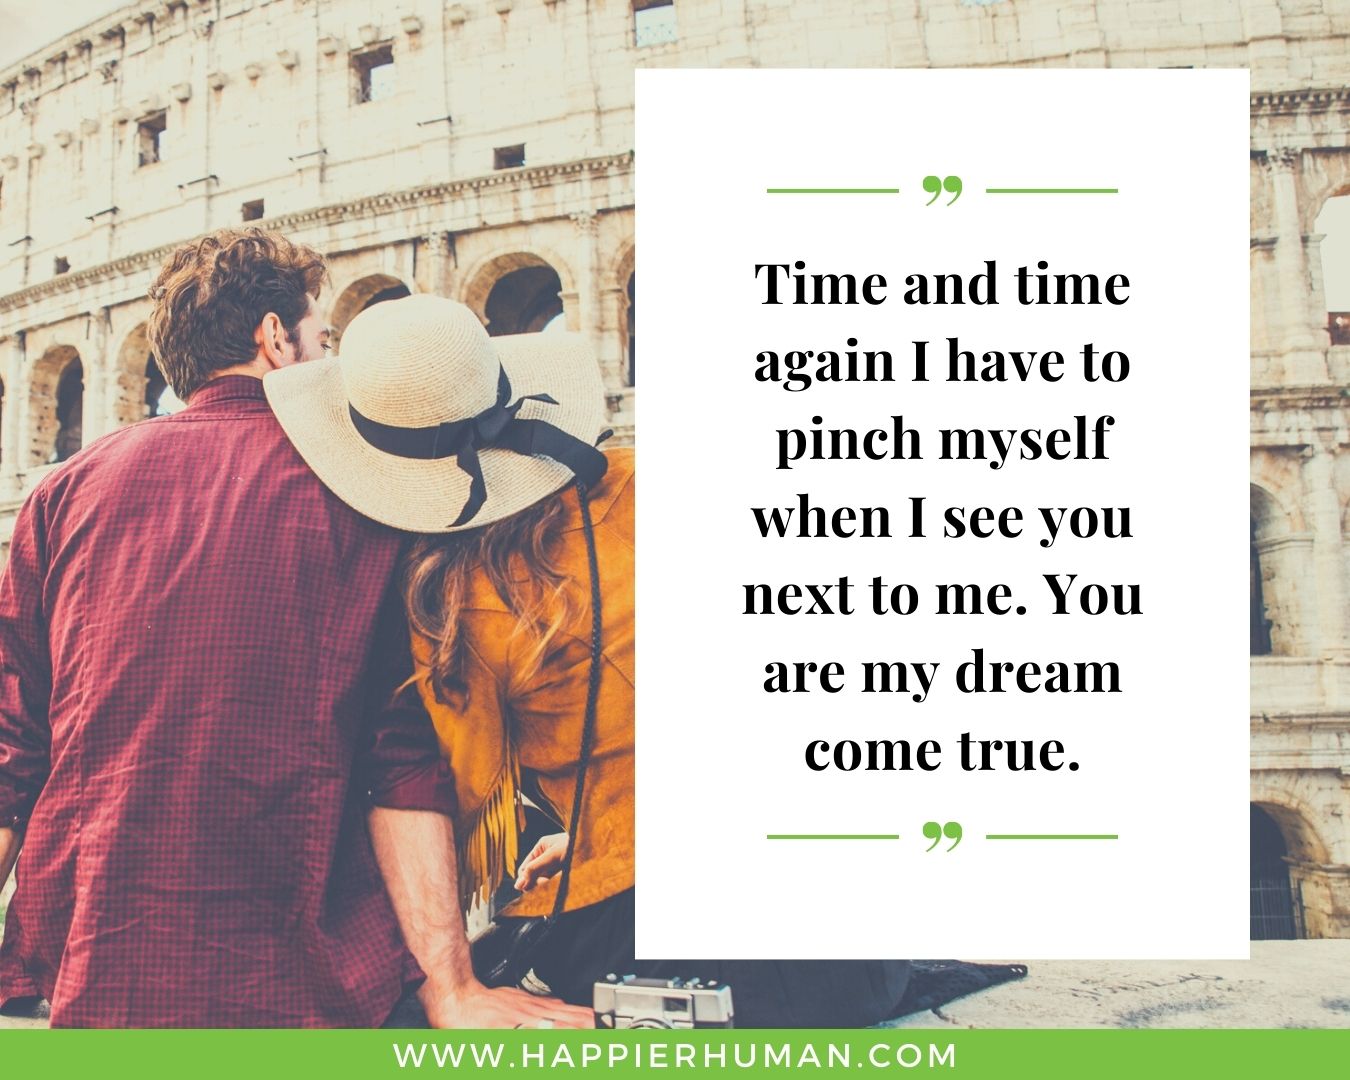 Sweet and Romantic Love Quotes for Her - “Time and time again I have to pinch myself when I see you next to me. You are my dream come true.”